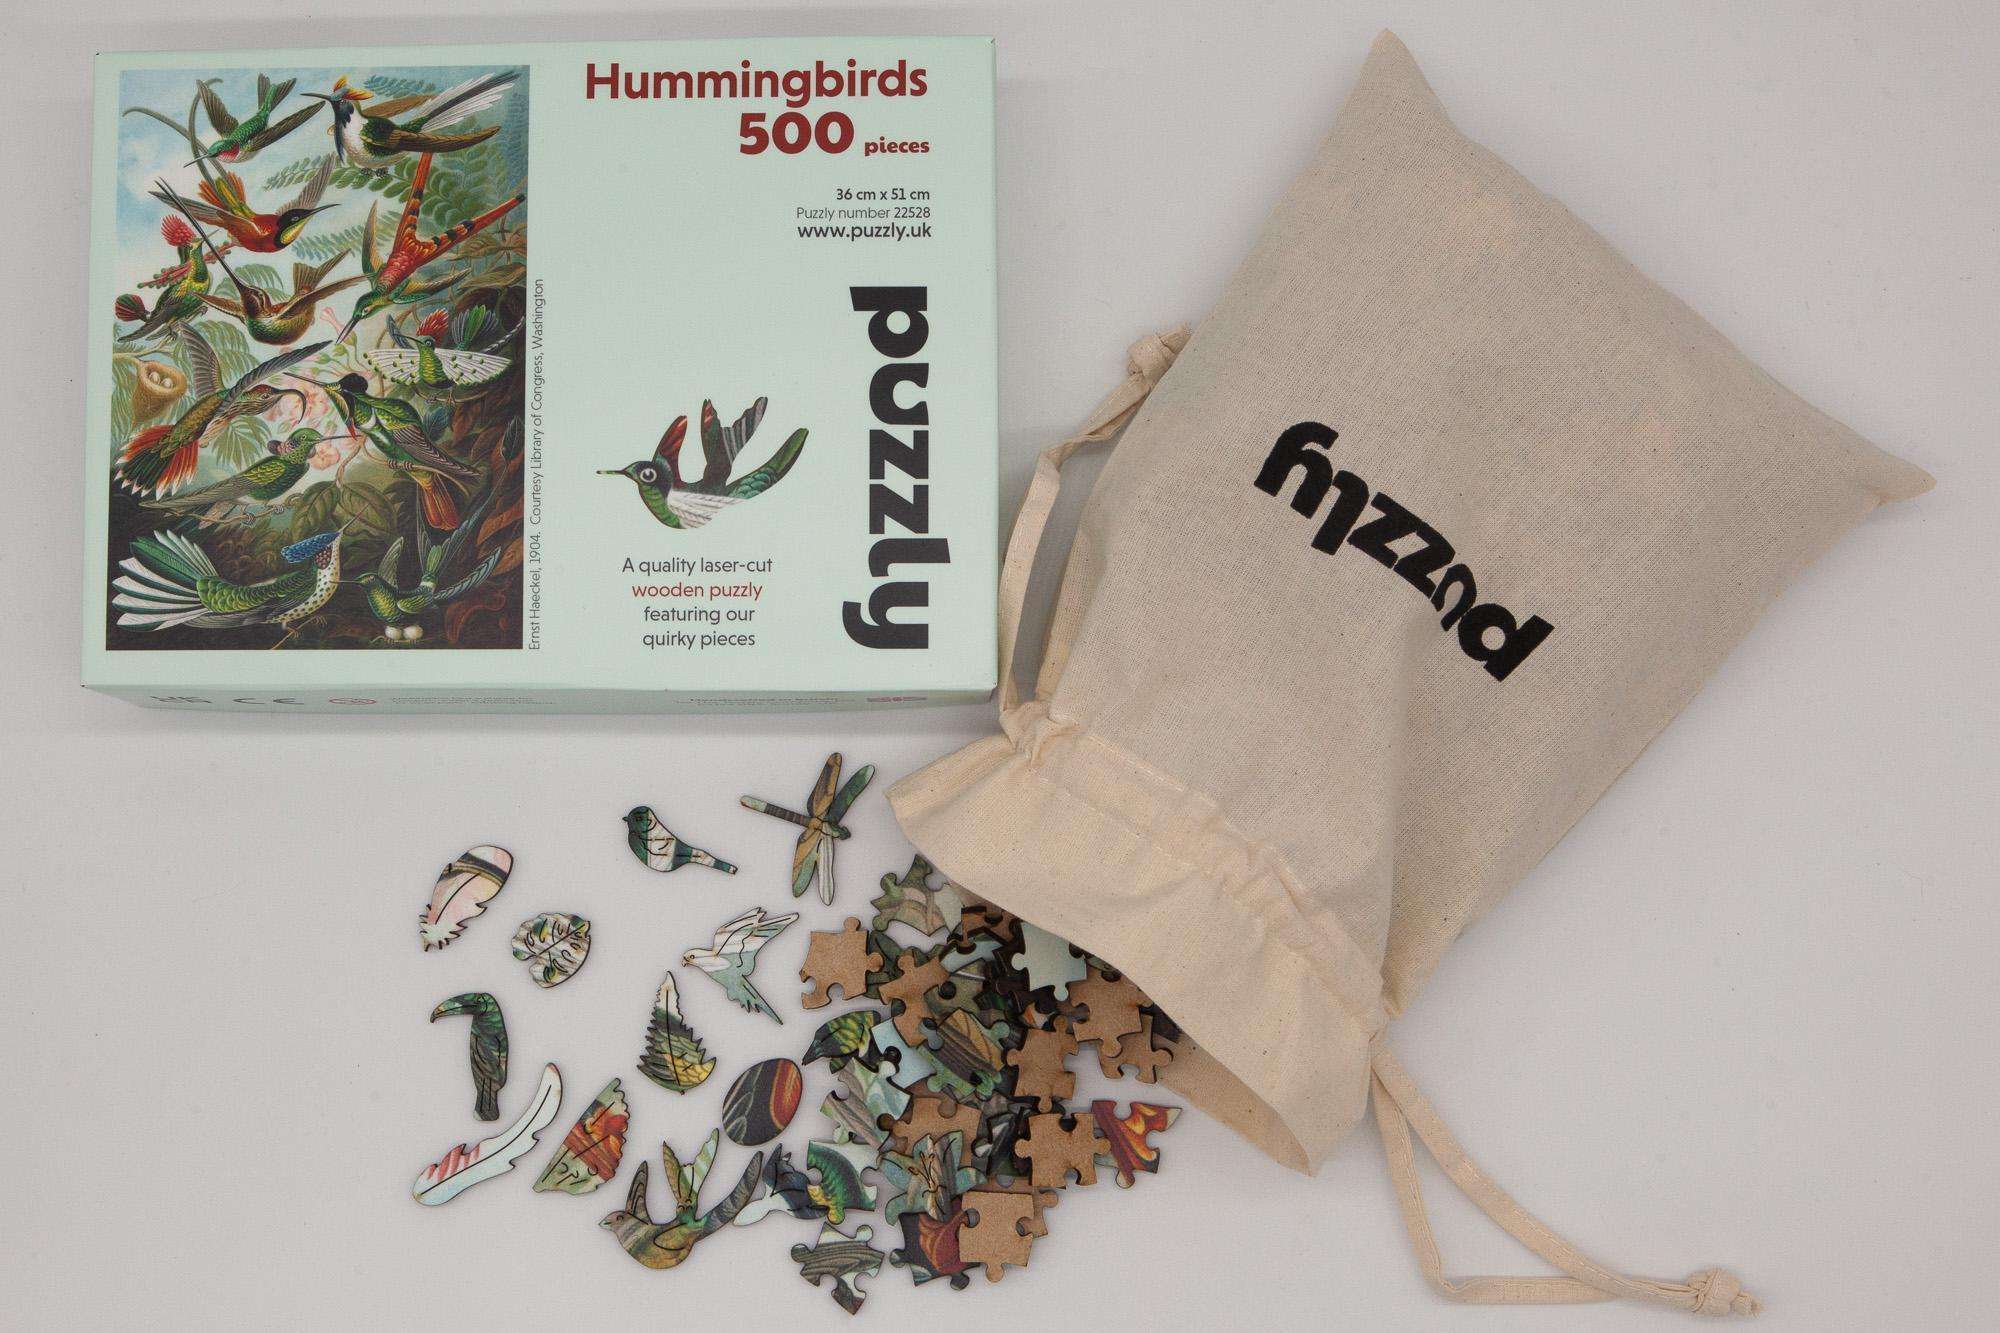 Hummingbirds, an adult wooden puzzle